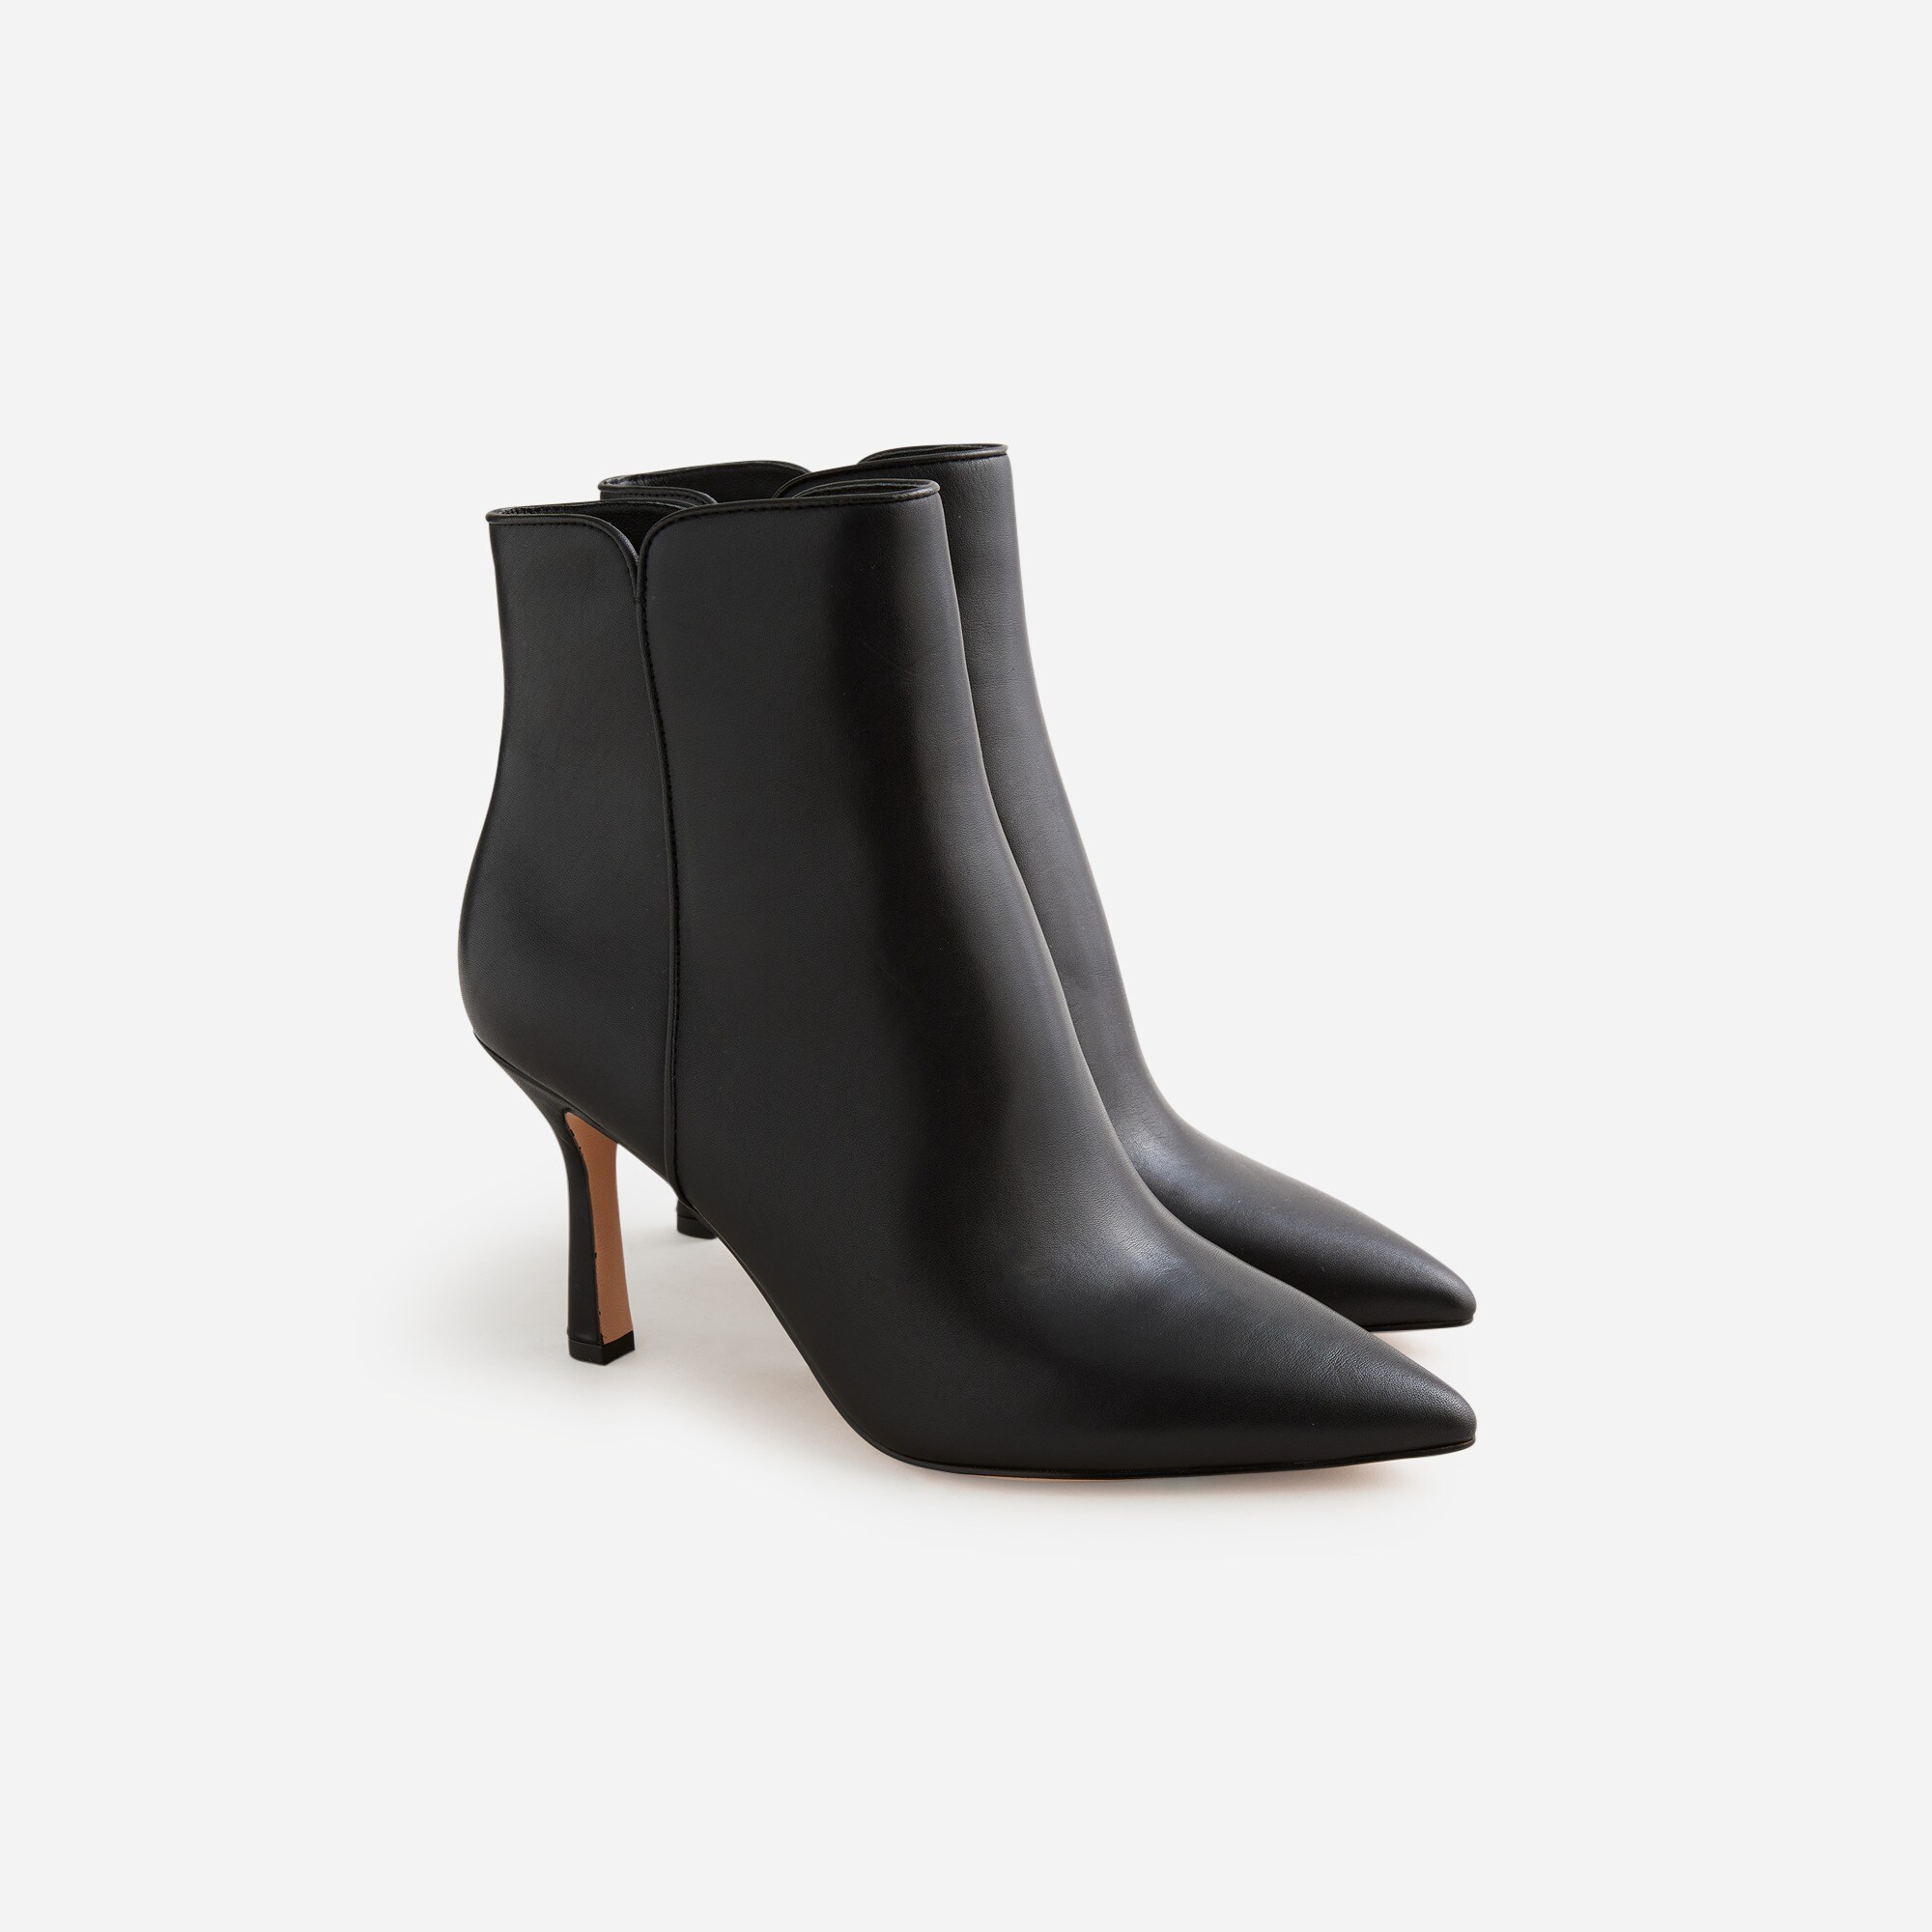  Pointed-toe ankle boots in leather